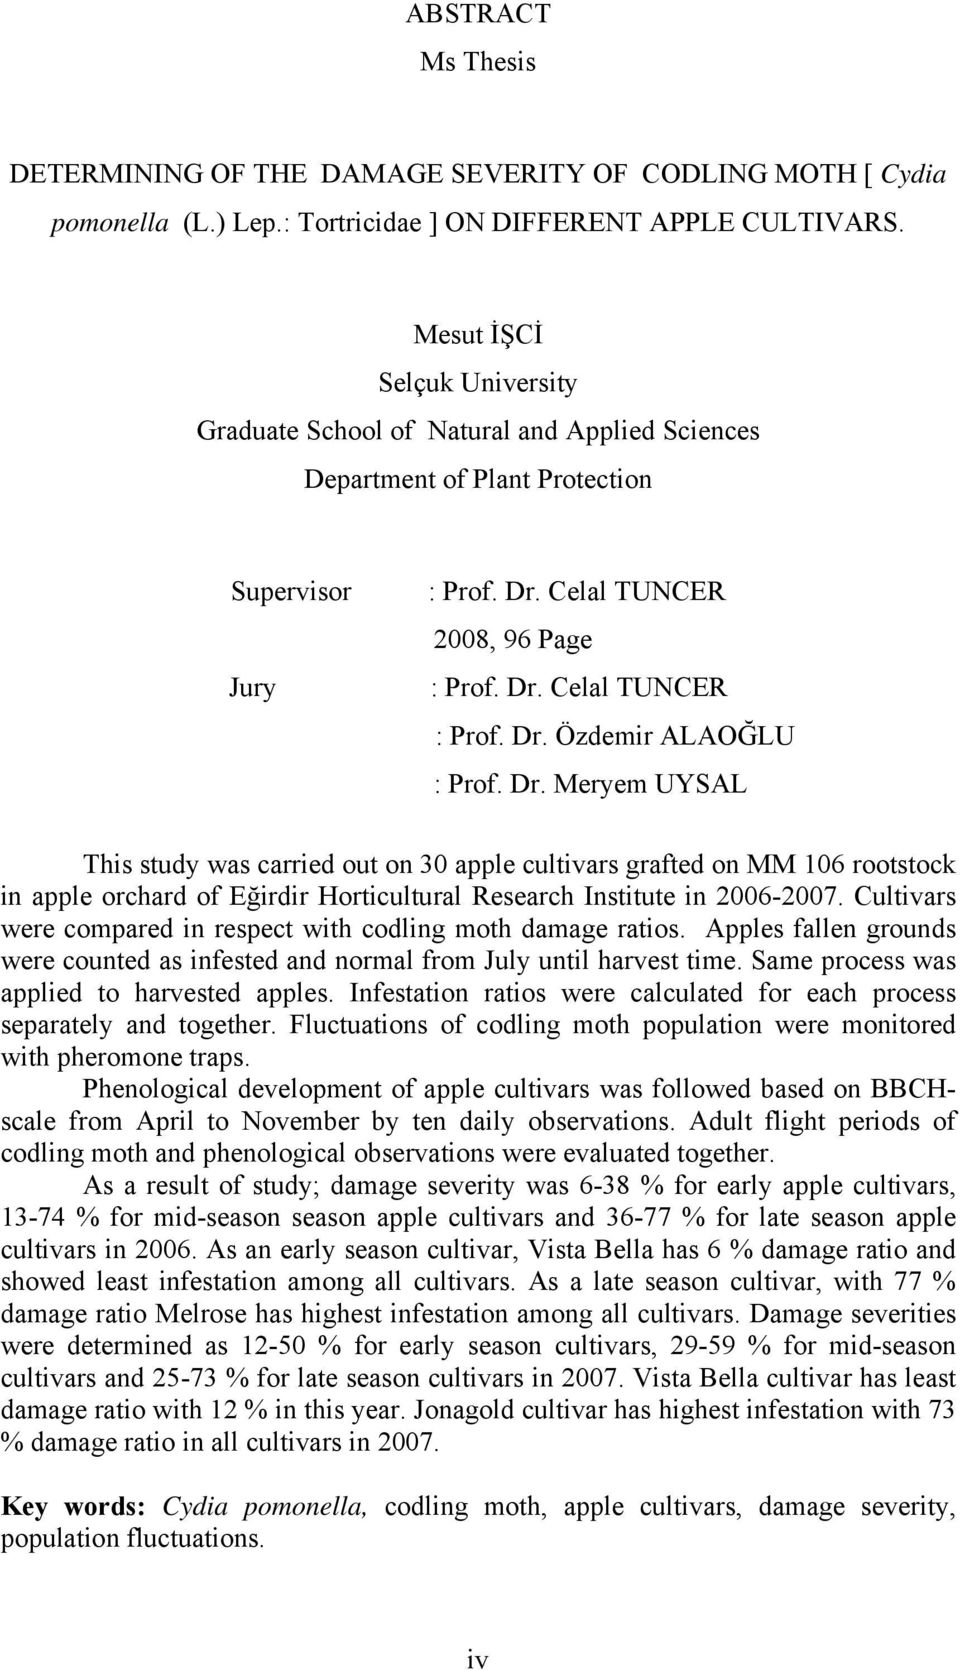 Dr. Meryem UYSAL This study was carried out on 30 apple cultivars grafted on MM 106 rootstock in apple orchard of Eğirdir Horticultural Research Institute in 2006-2007.